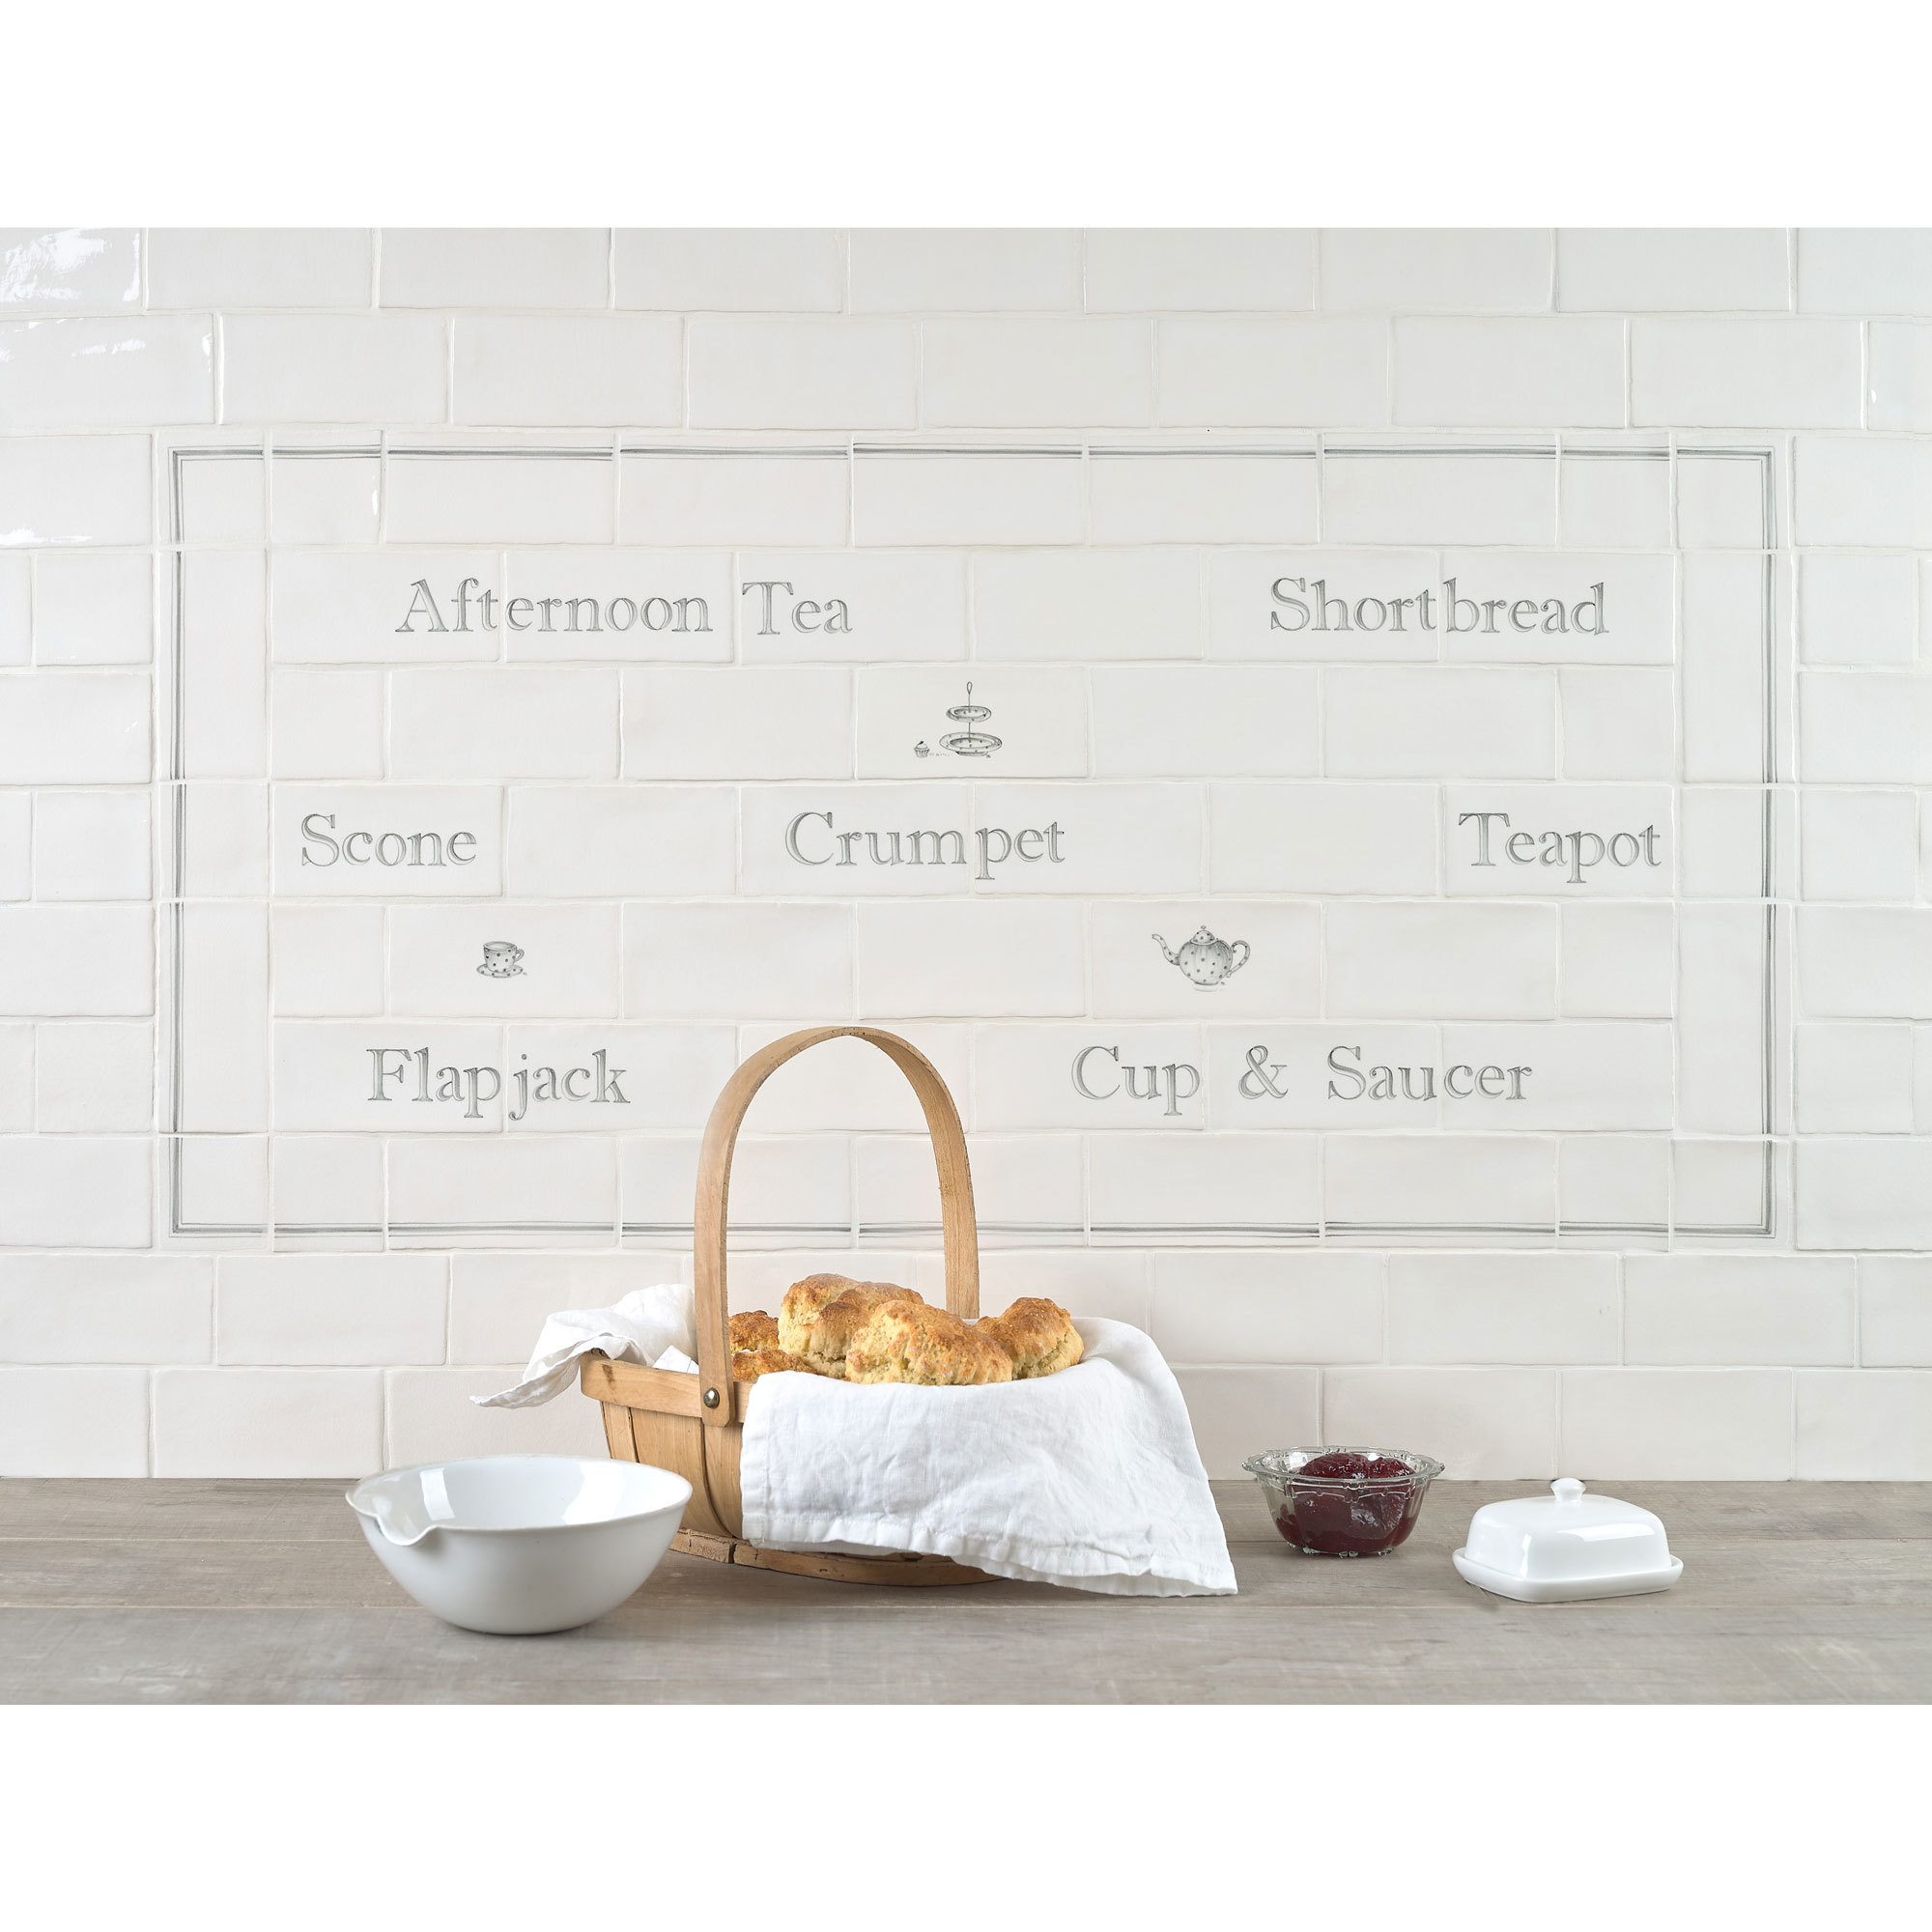 Afternoon Tea Panel with Afternoon Tea Decors, product variant image